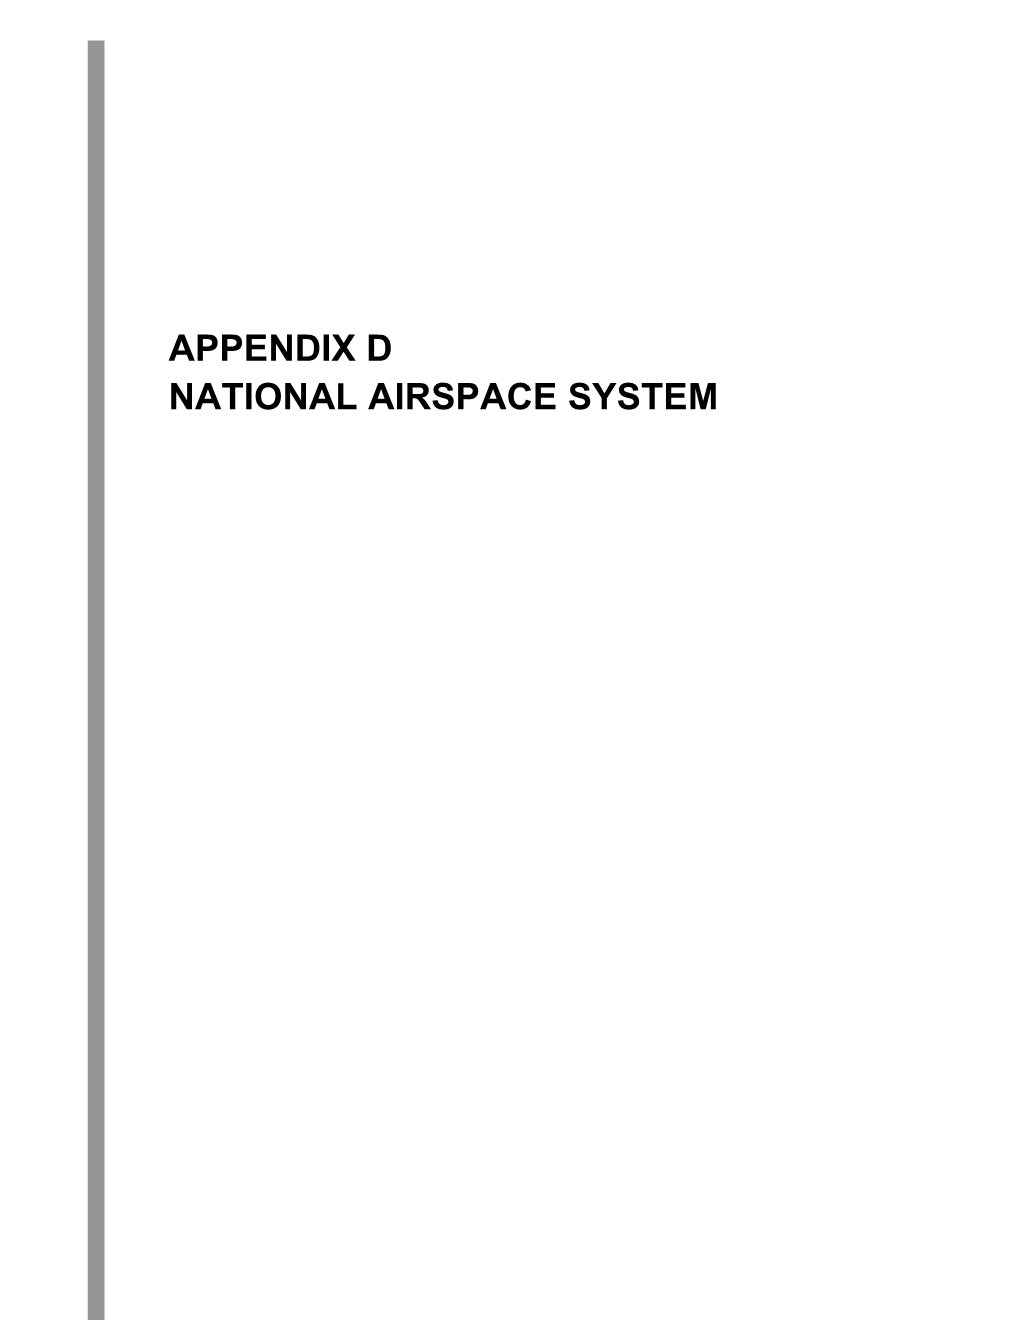 Appendix D National Airspace System